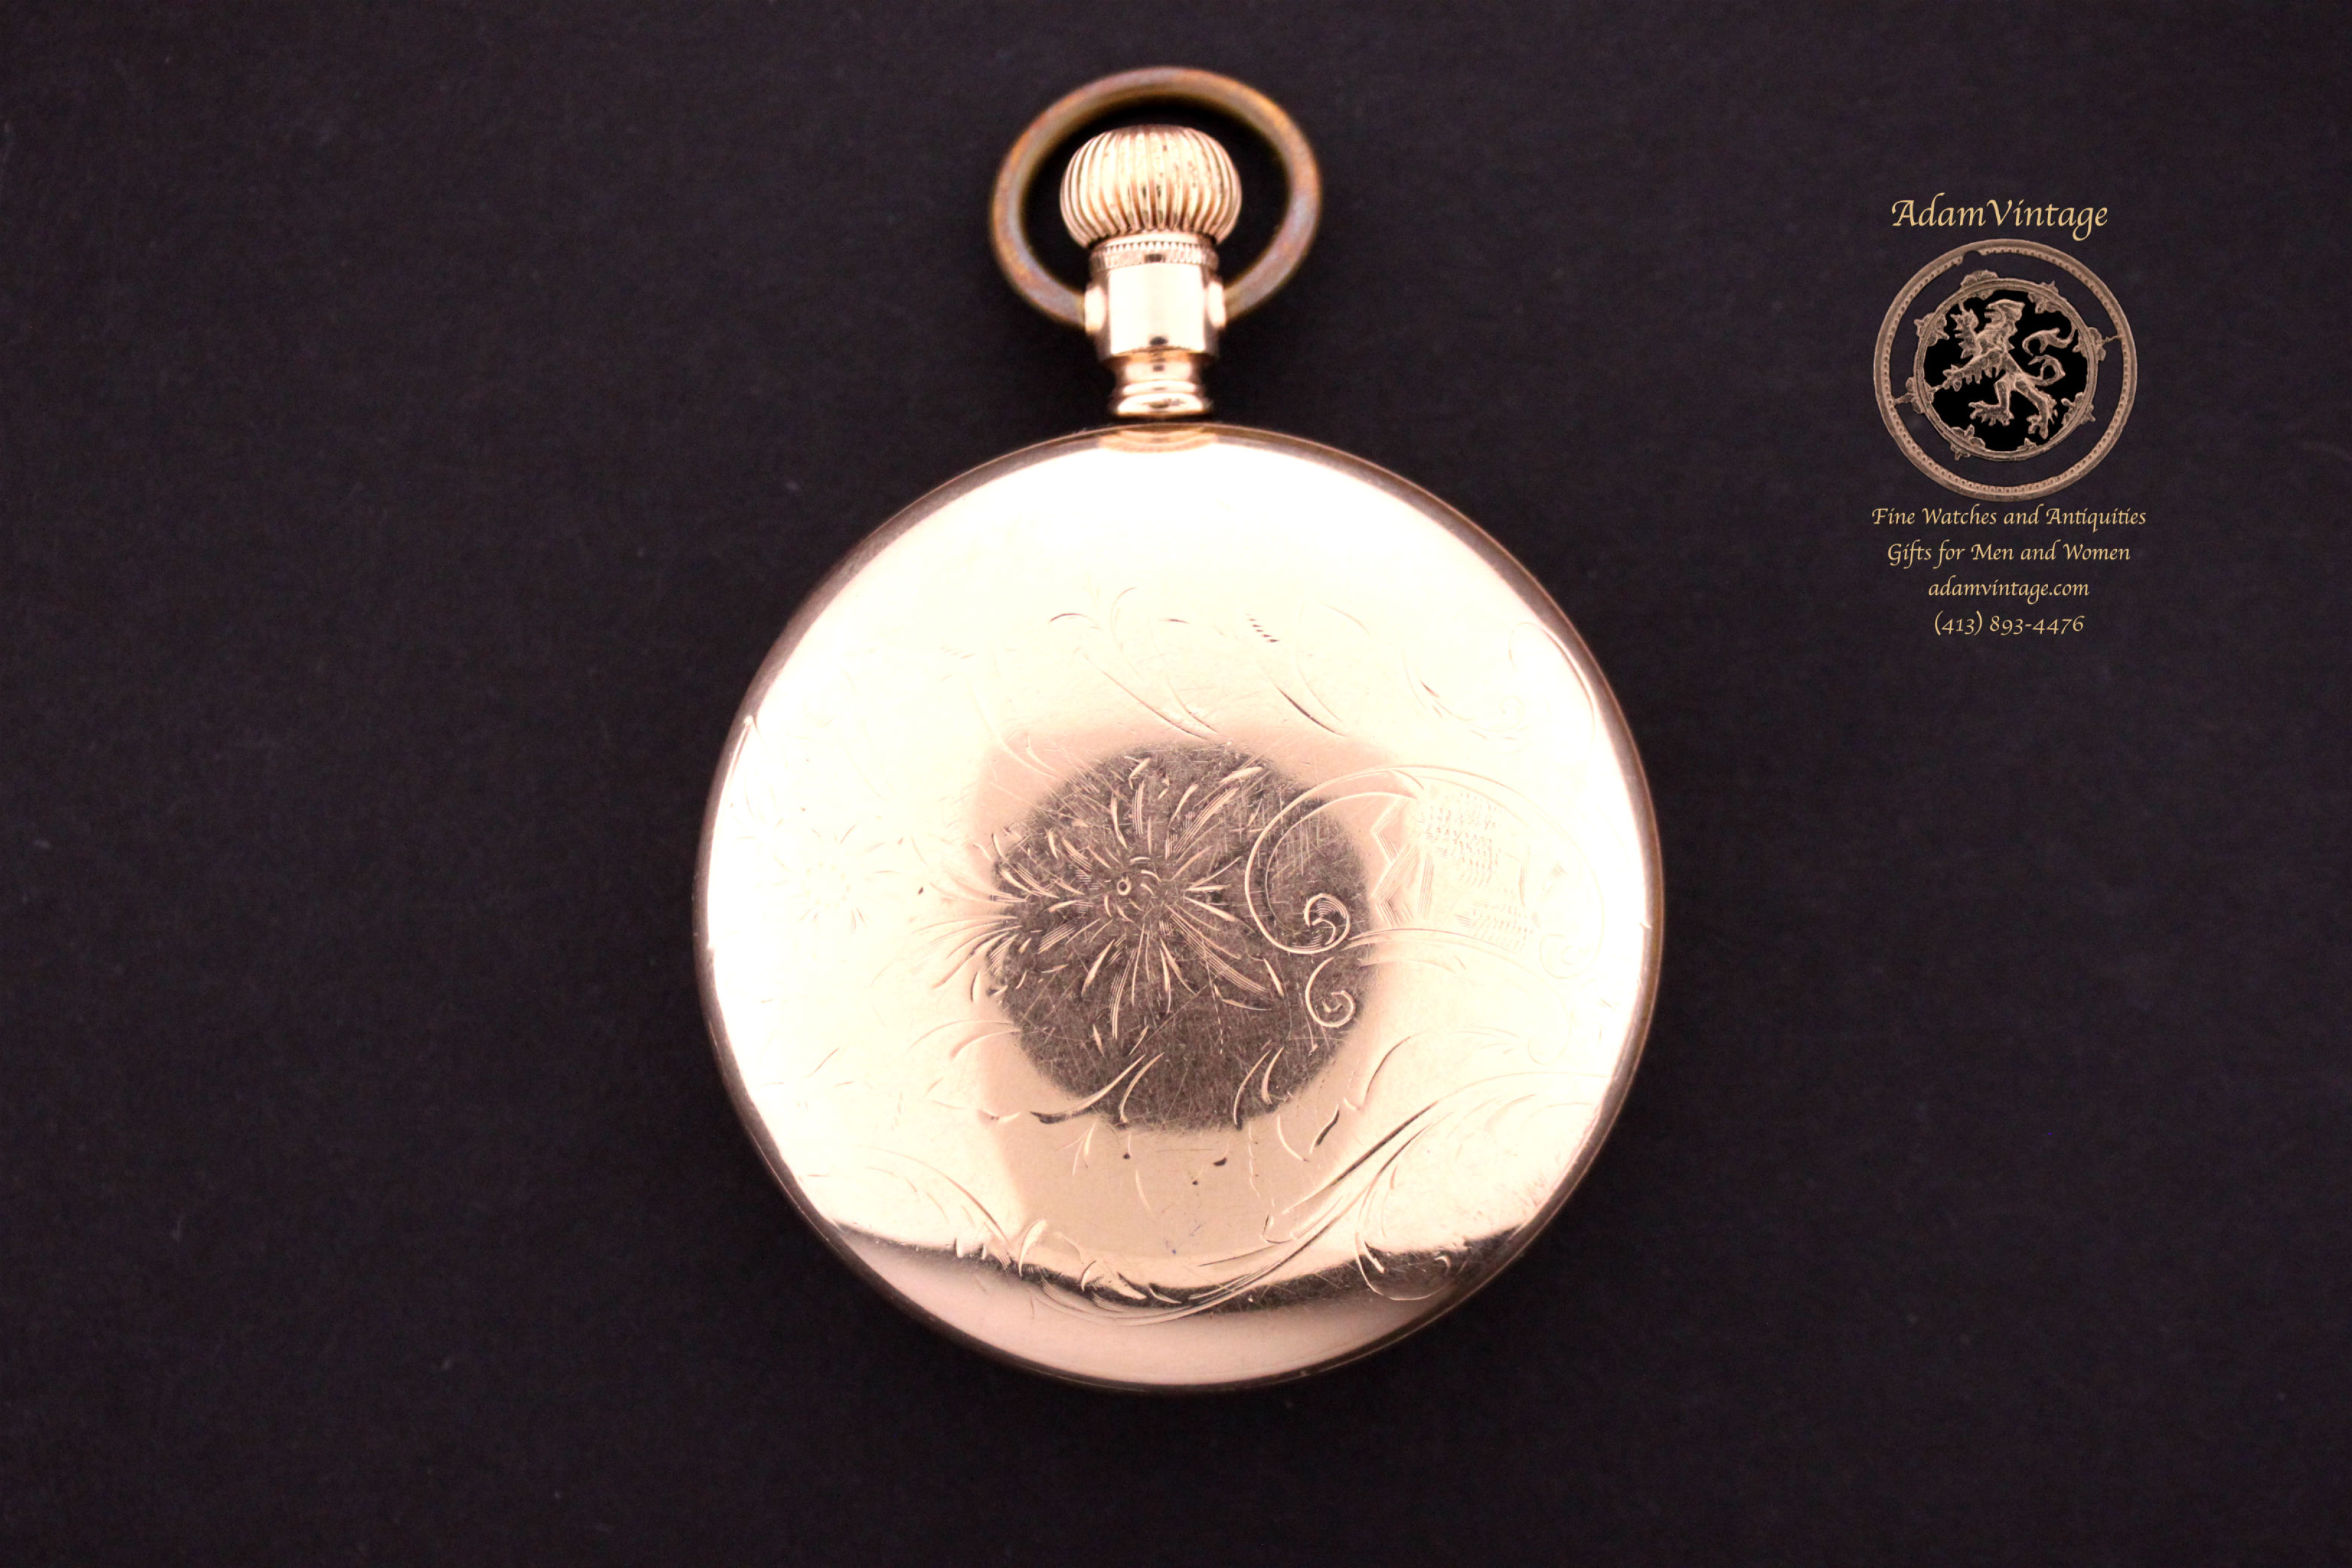 Rockford Grade 900 Pocket Watch ca. 1905 24 Jewel Size 18s | one of the ...